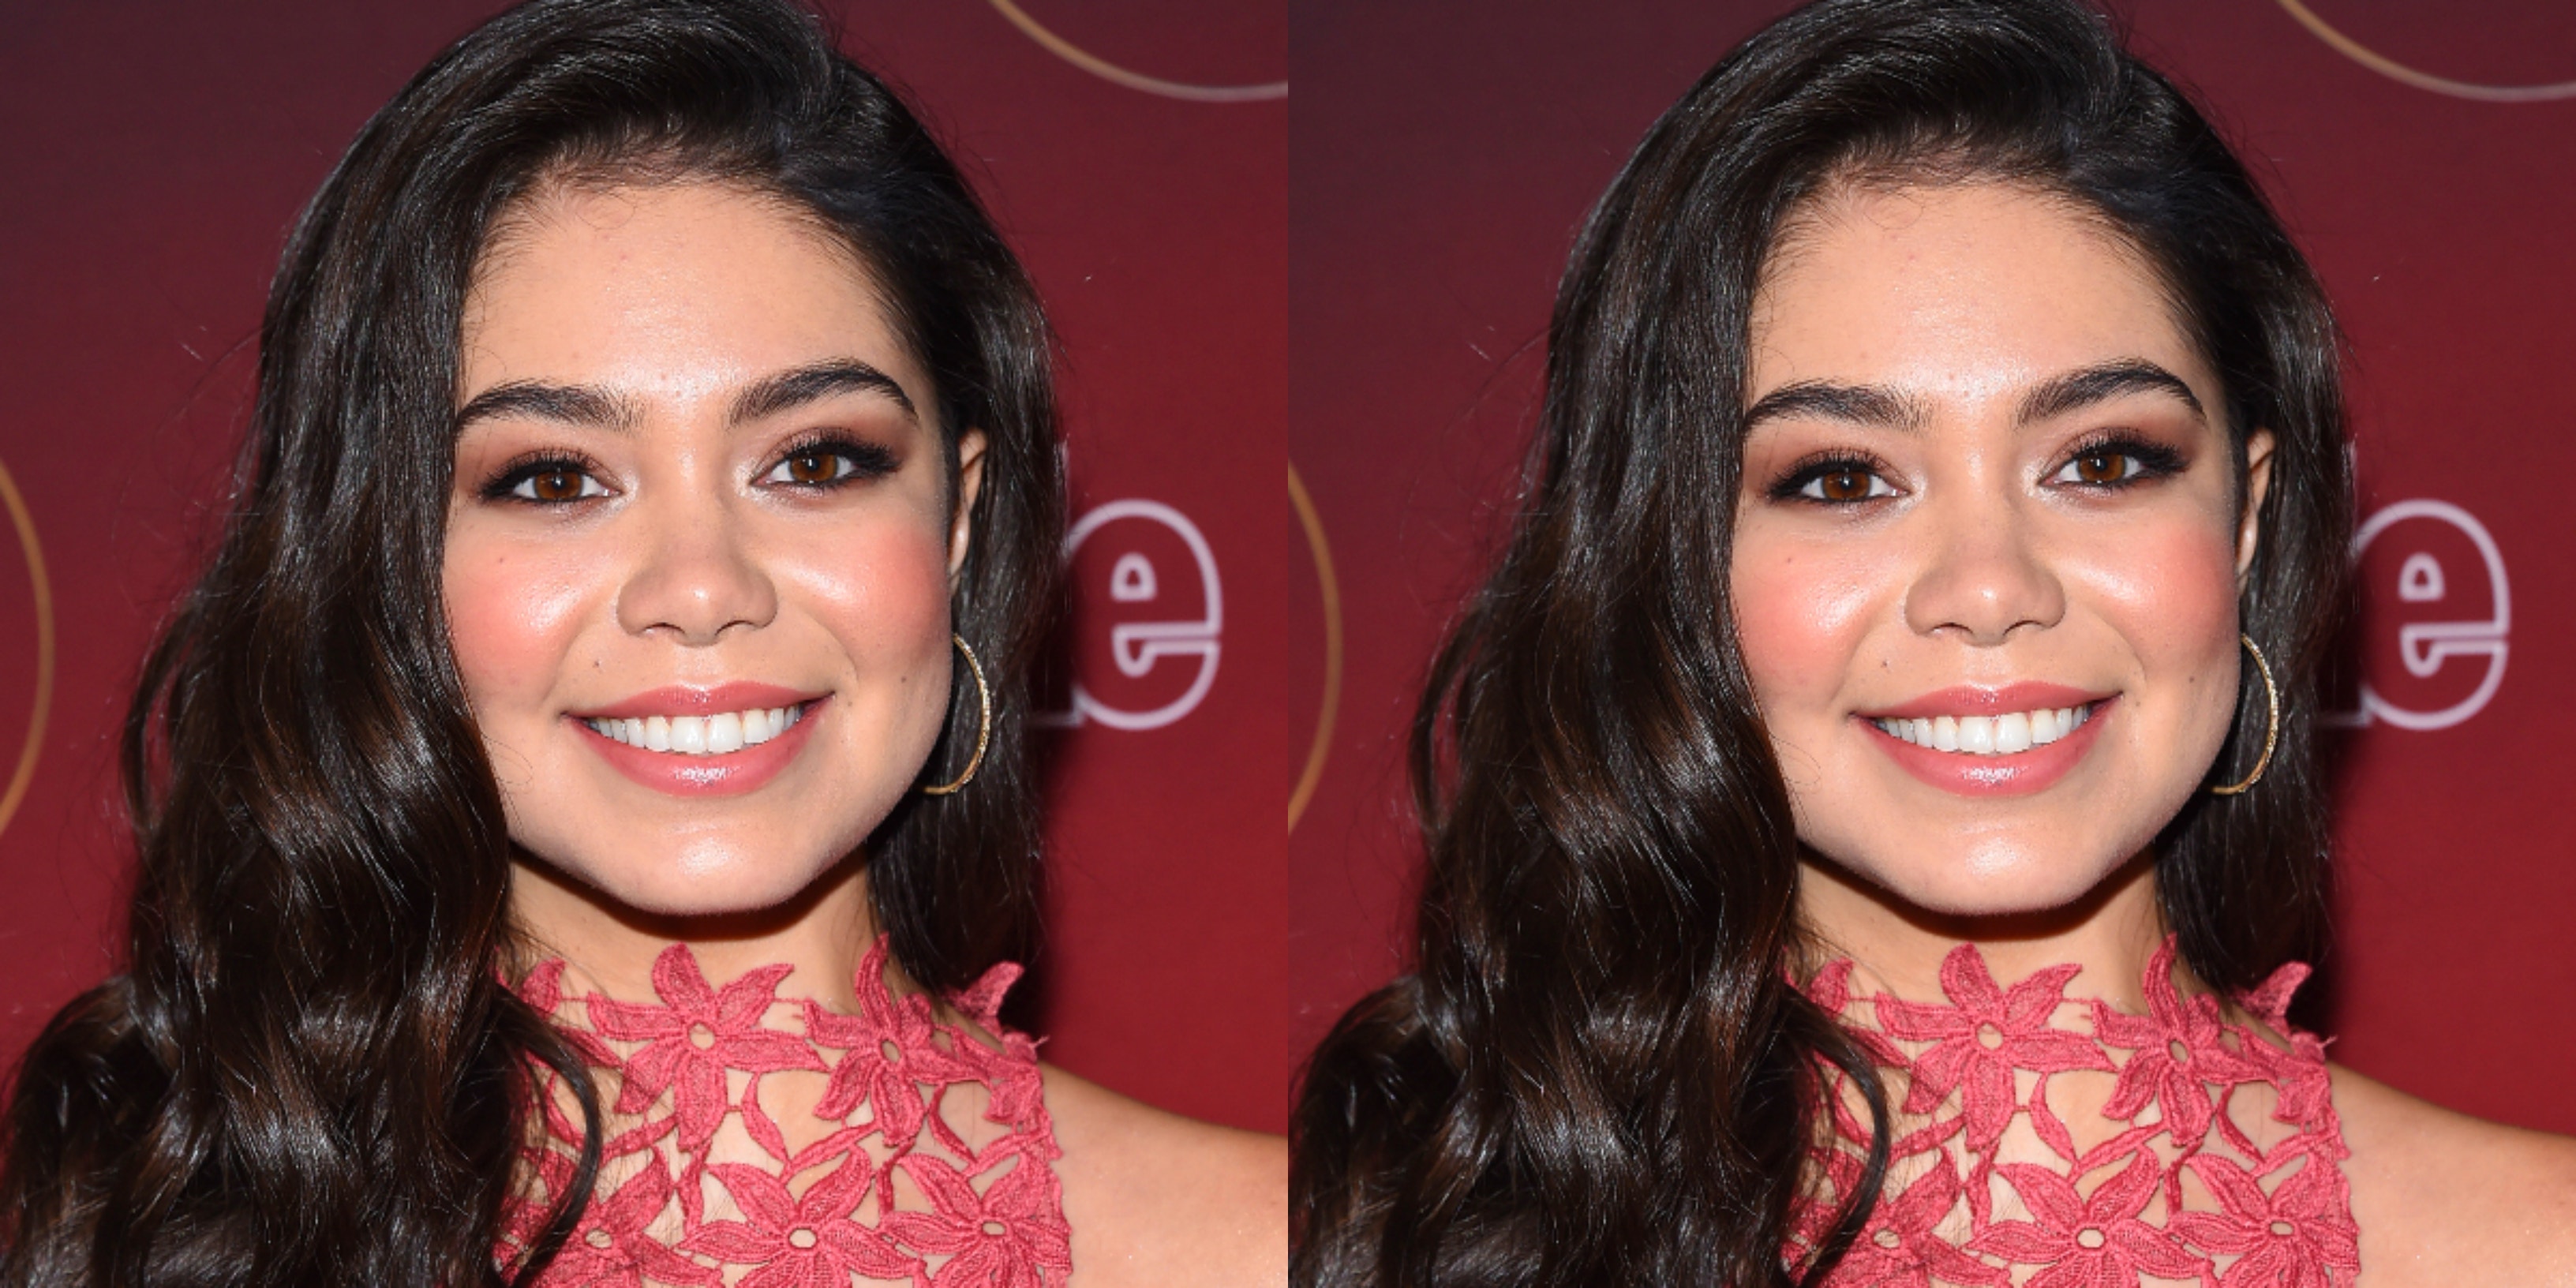 Auli'i Cravalho Went From 'Moana' To 'The Little Mermaid' — Get To Know Her & Her New Amazon Series 'The Power'